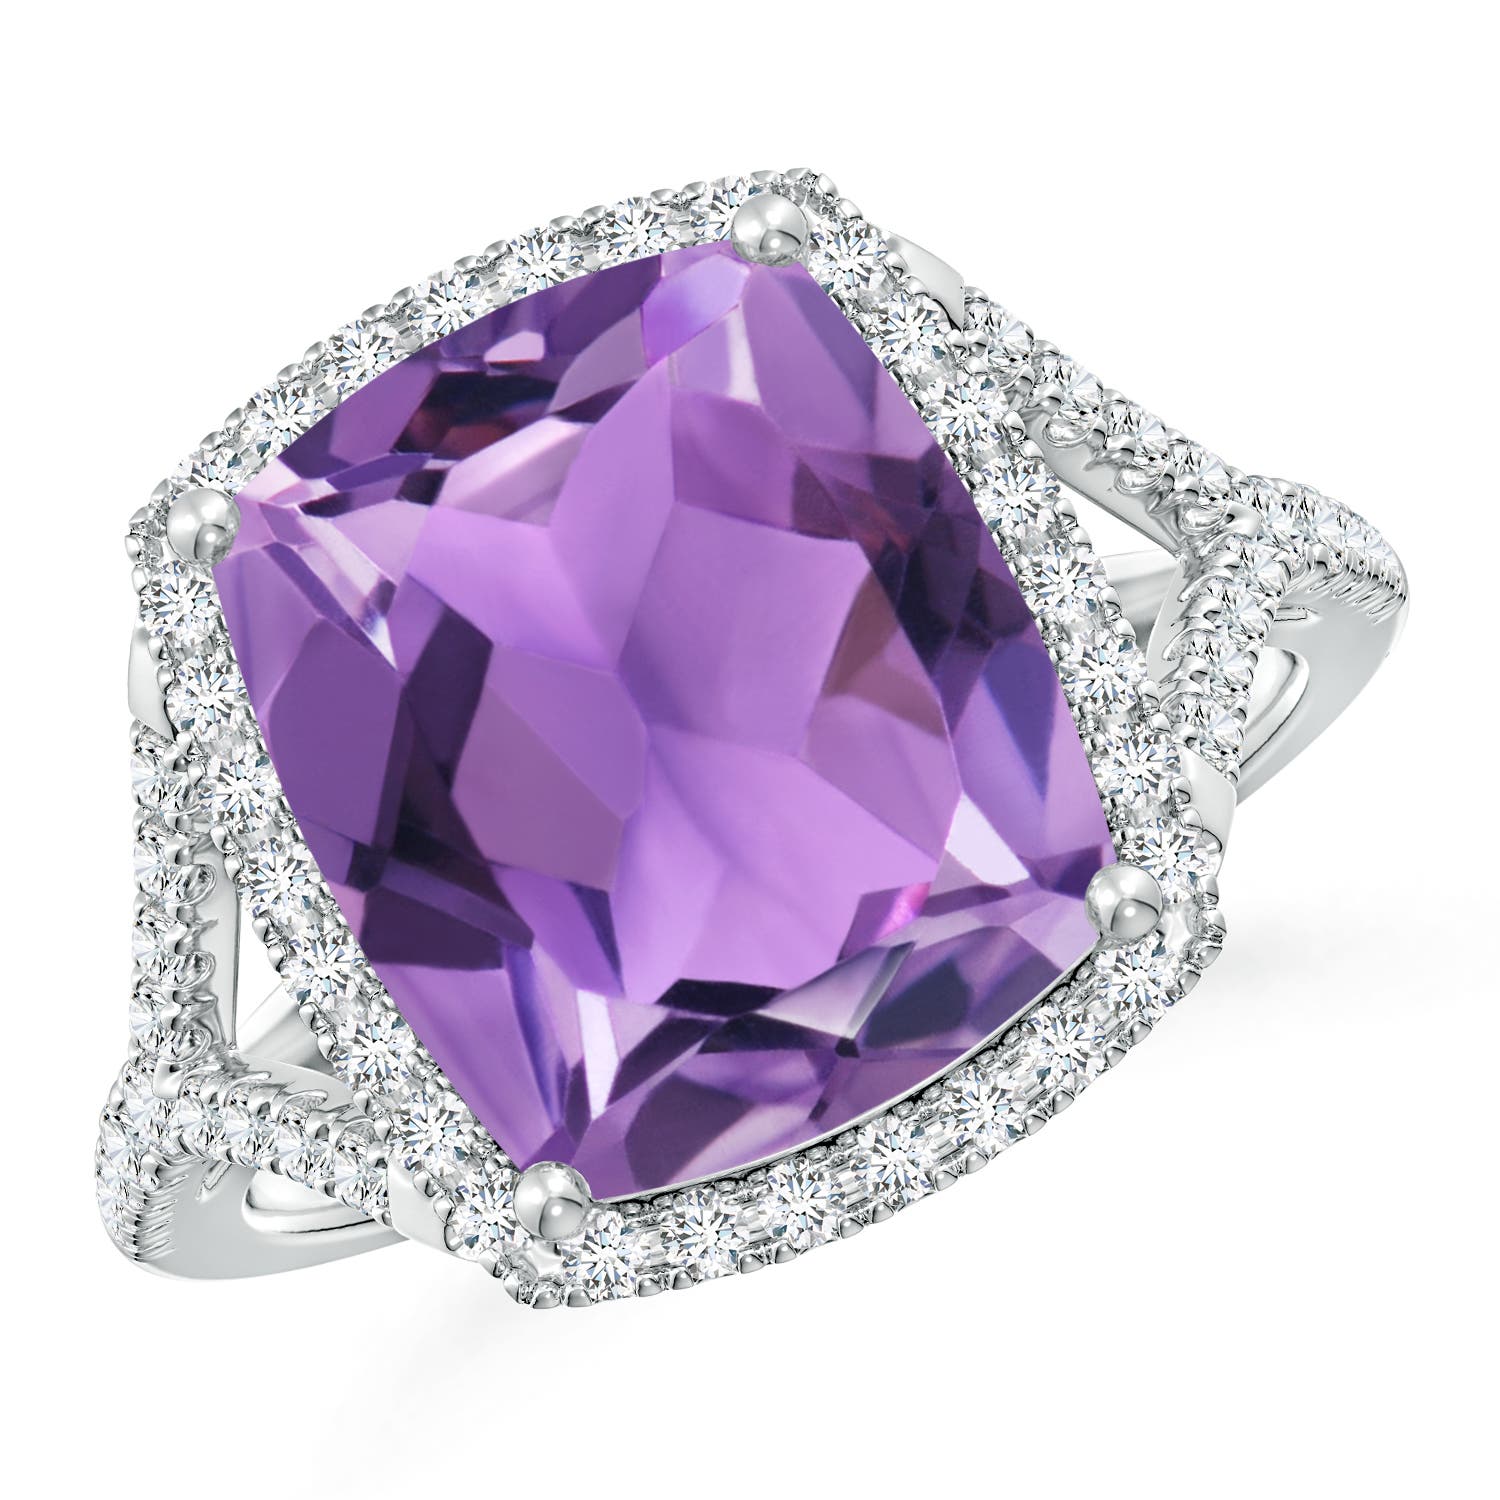 AA - Amethyst / 5.07 CT / 14 KT White Gold